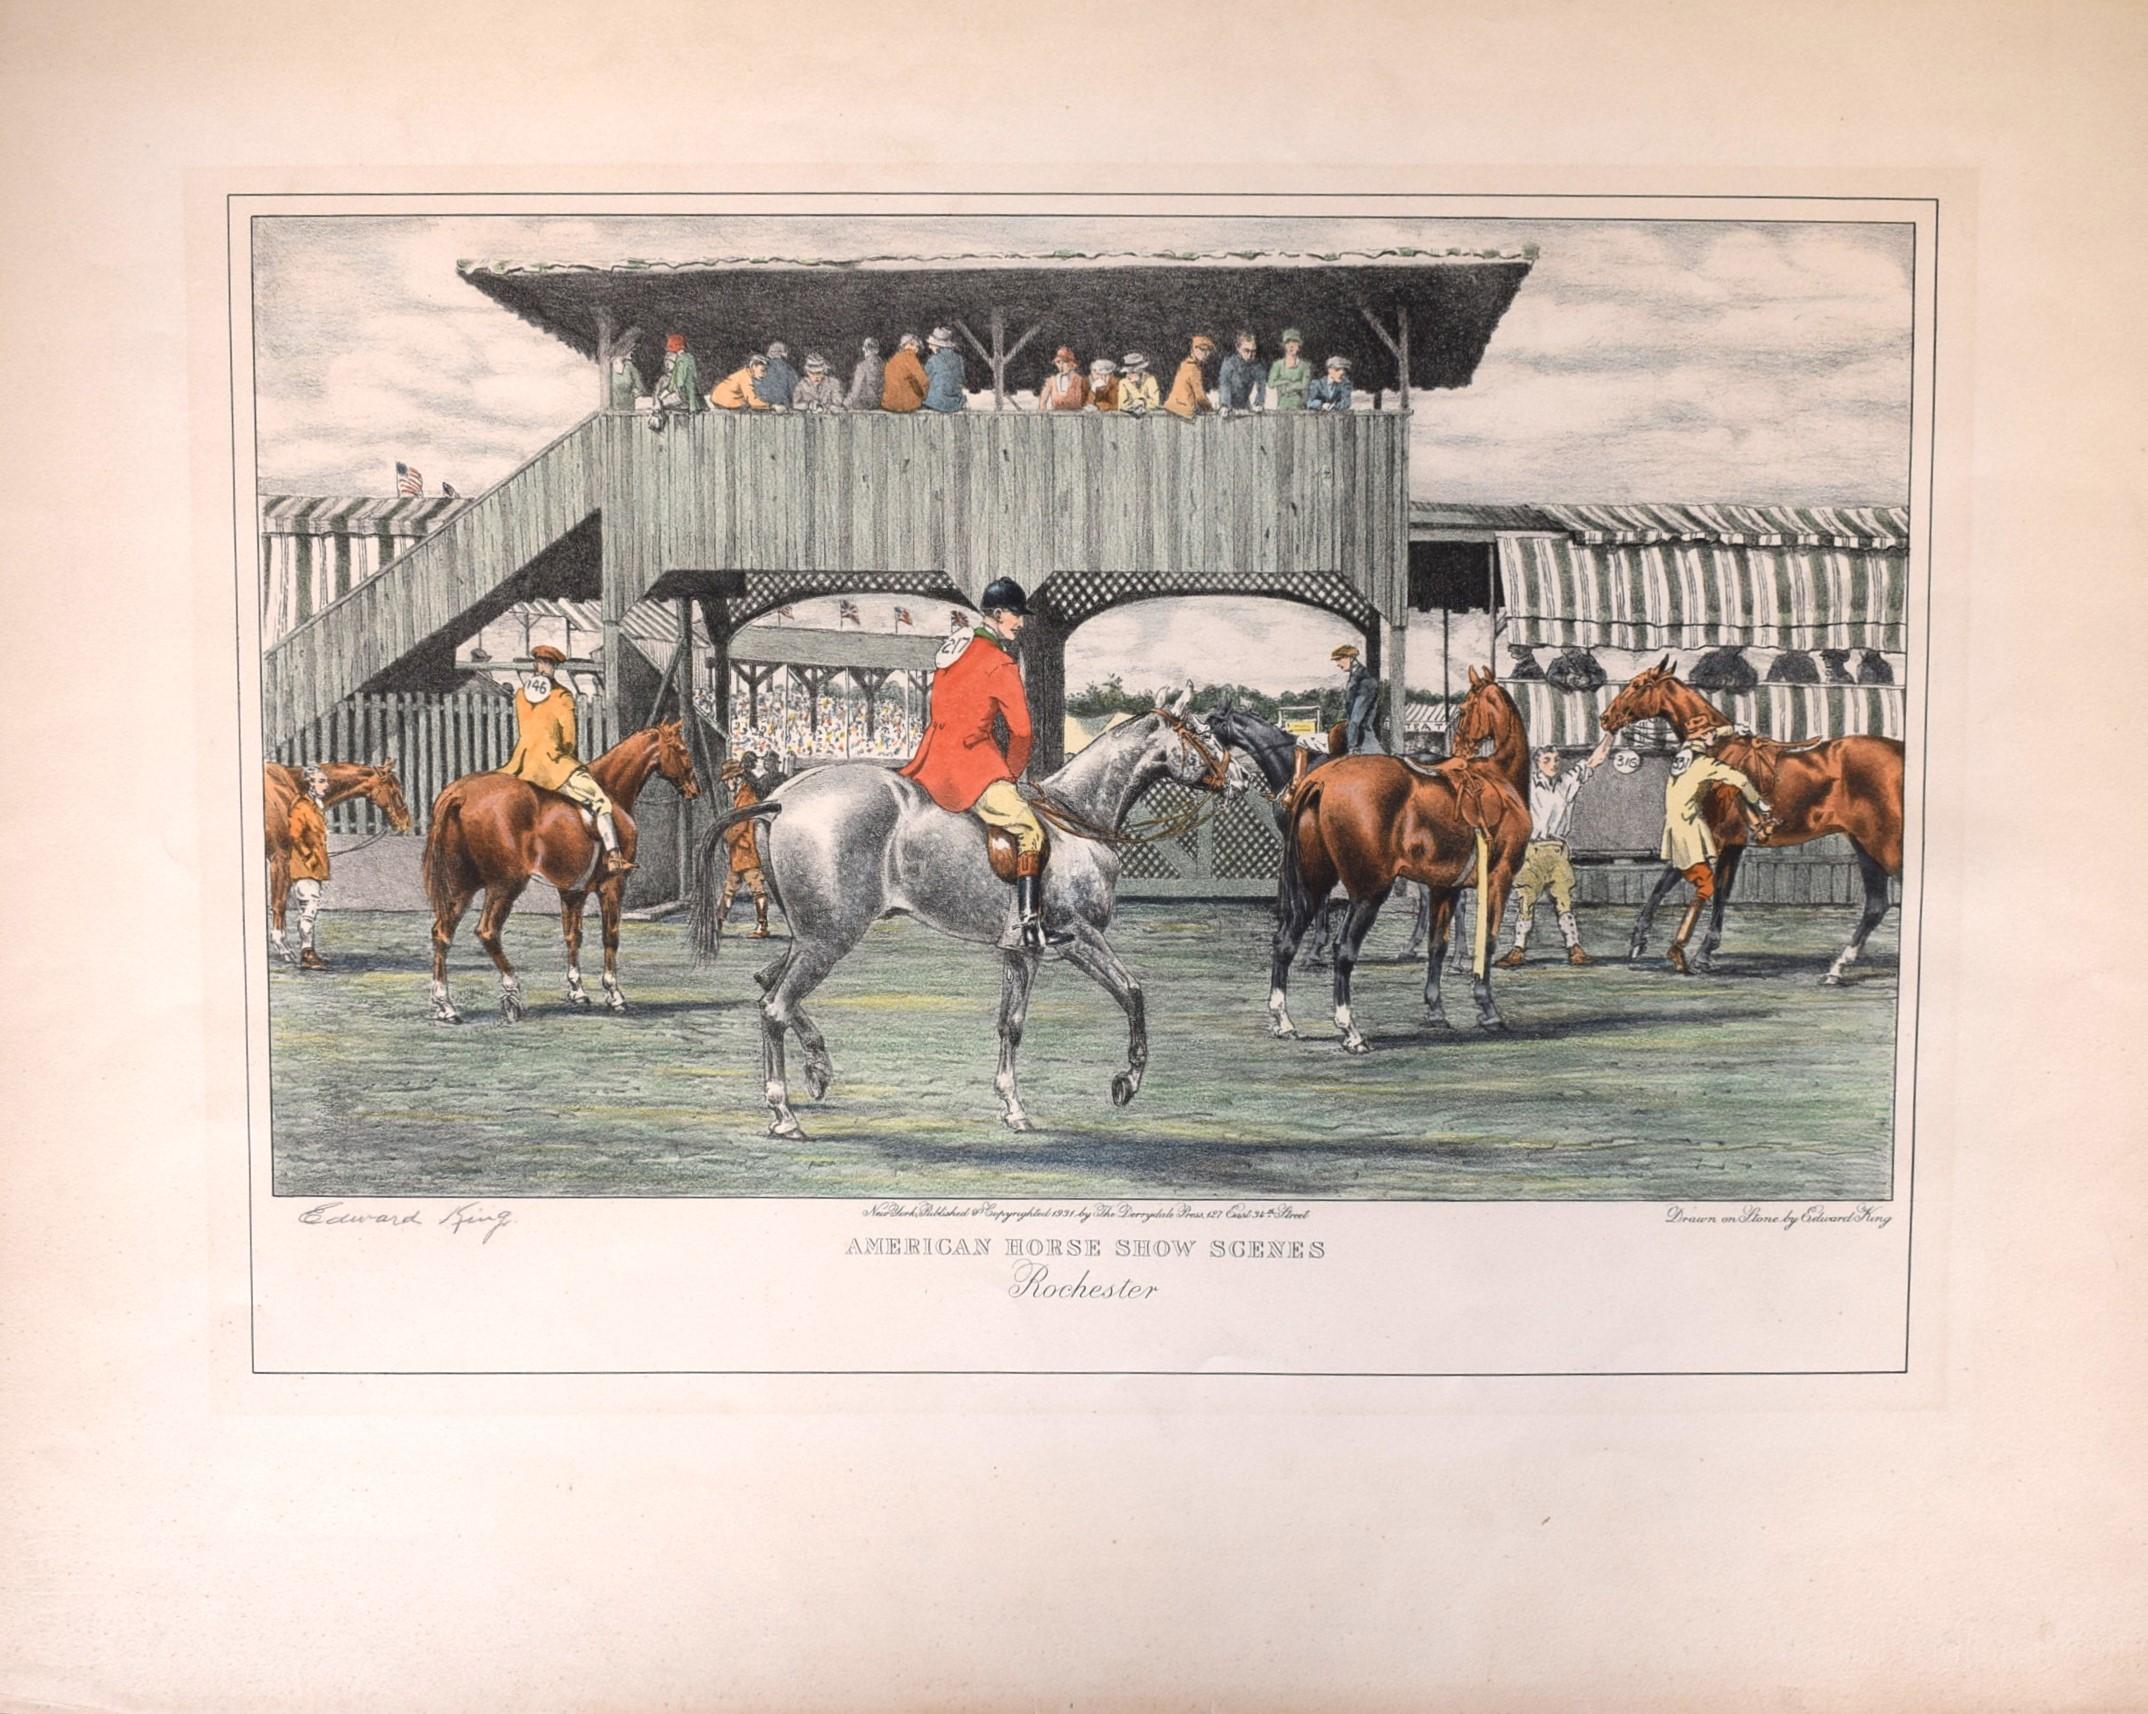 Edward King (American; 1886- 1962)
American Horse Show Scenes, Rochester, 1931
Lithograph on paper
Signed to the lower left
Limited Edition of 250
Published by The Derrydale Press

Print Sz: 13 1/2"H x 19"W

Drawn on stone

Mat Sz: 20 1/8"H x 25"W